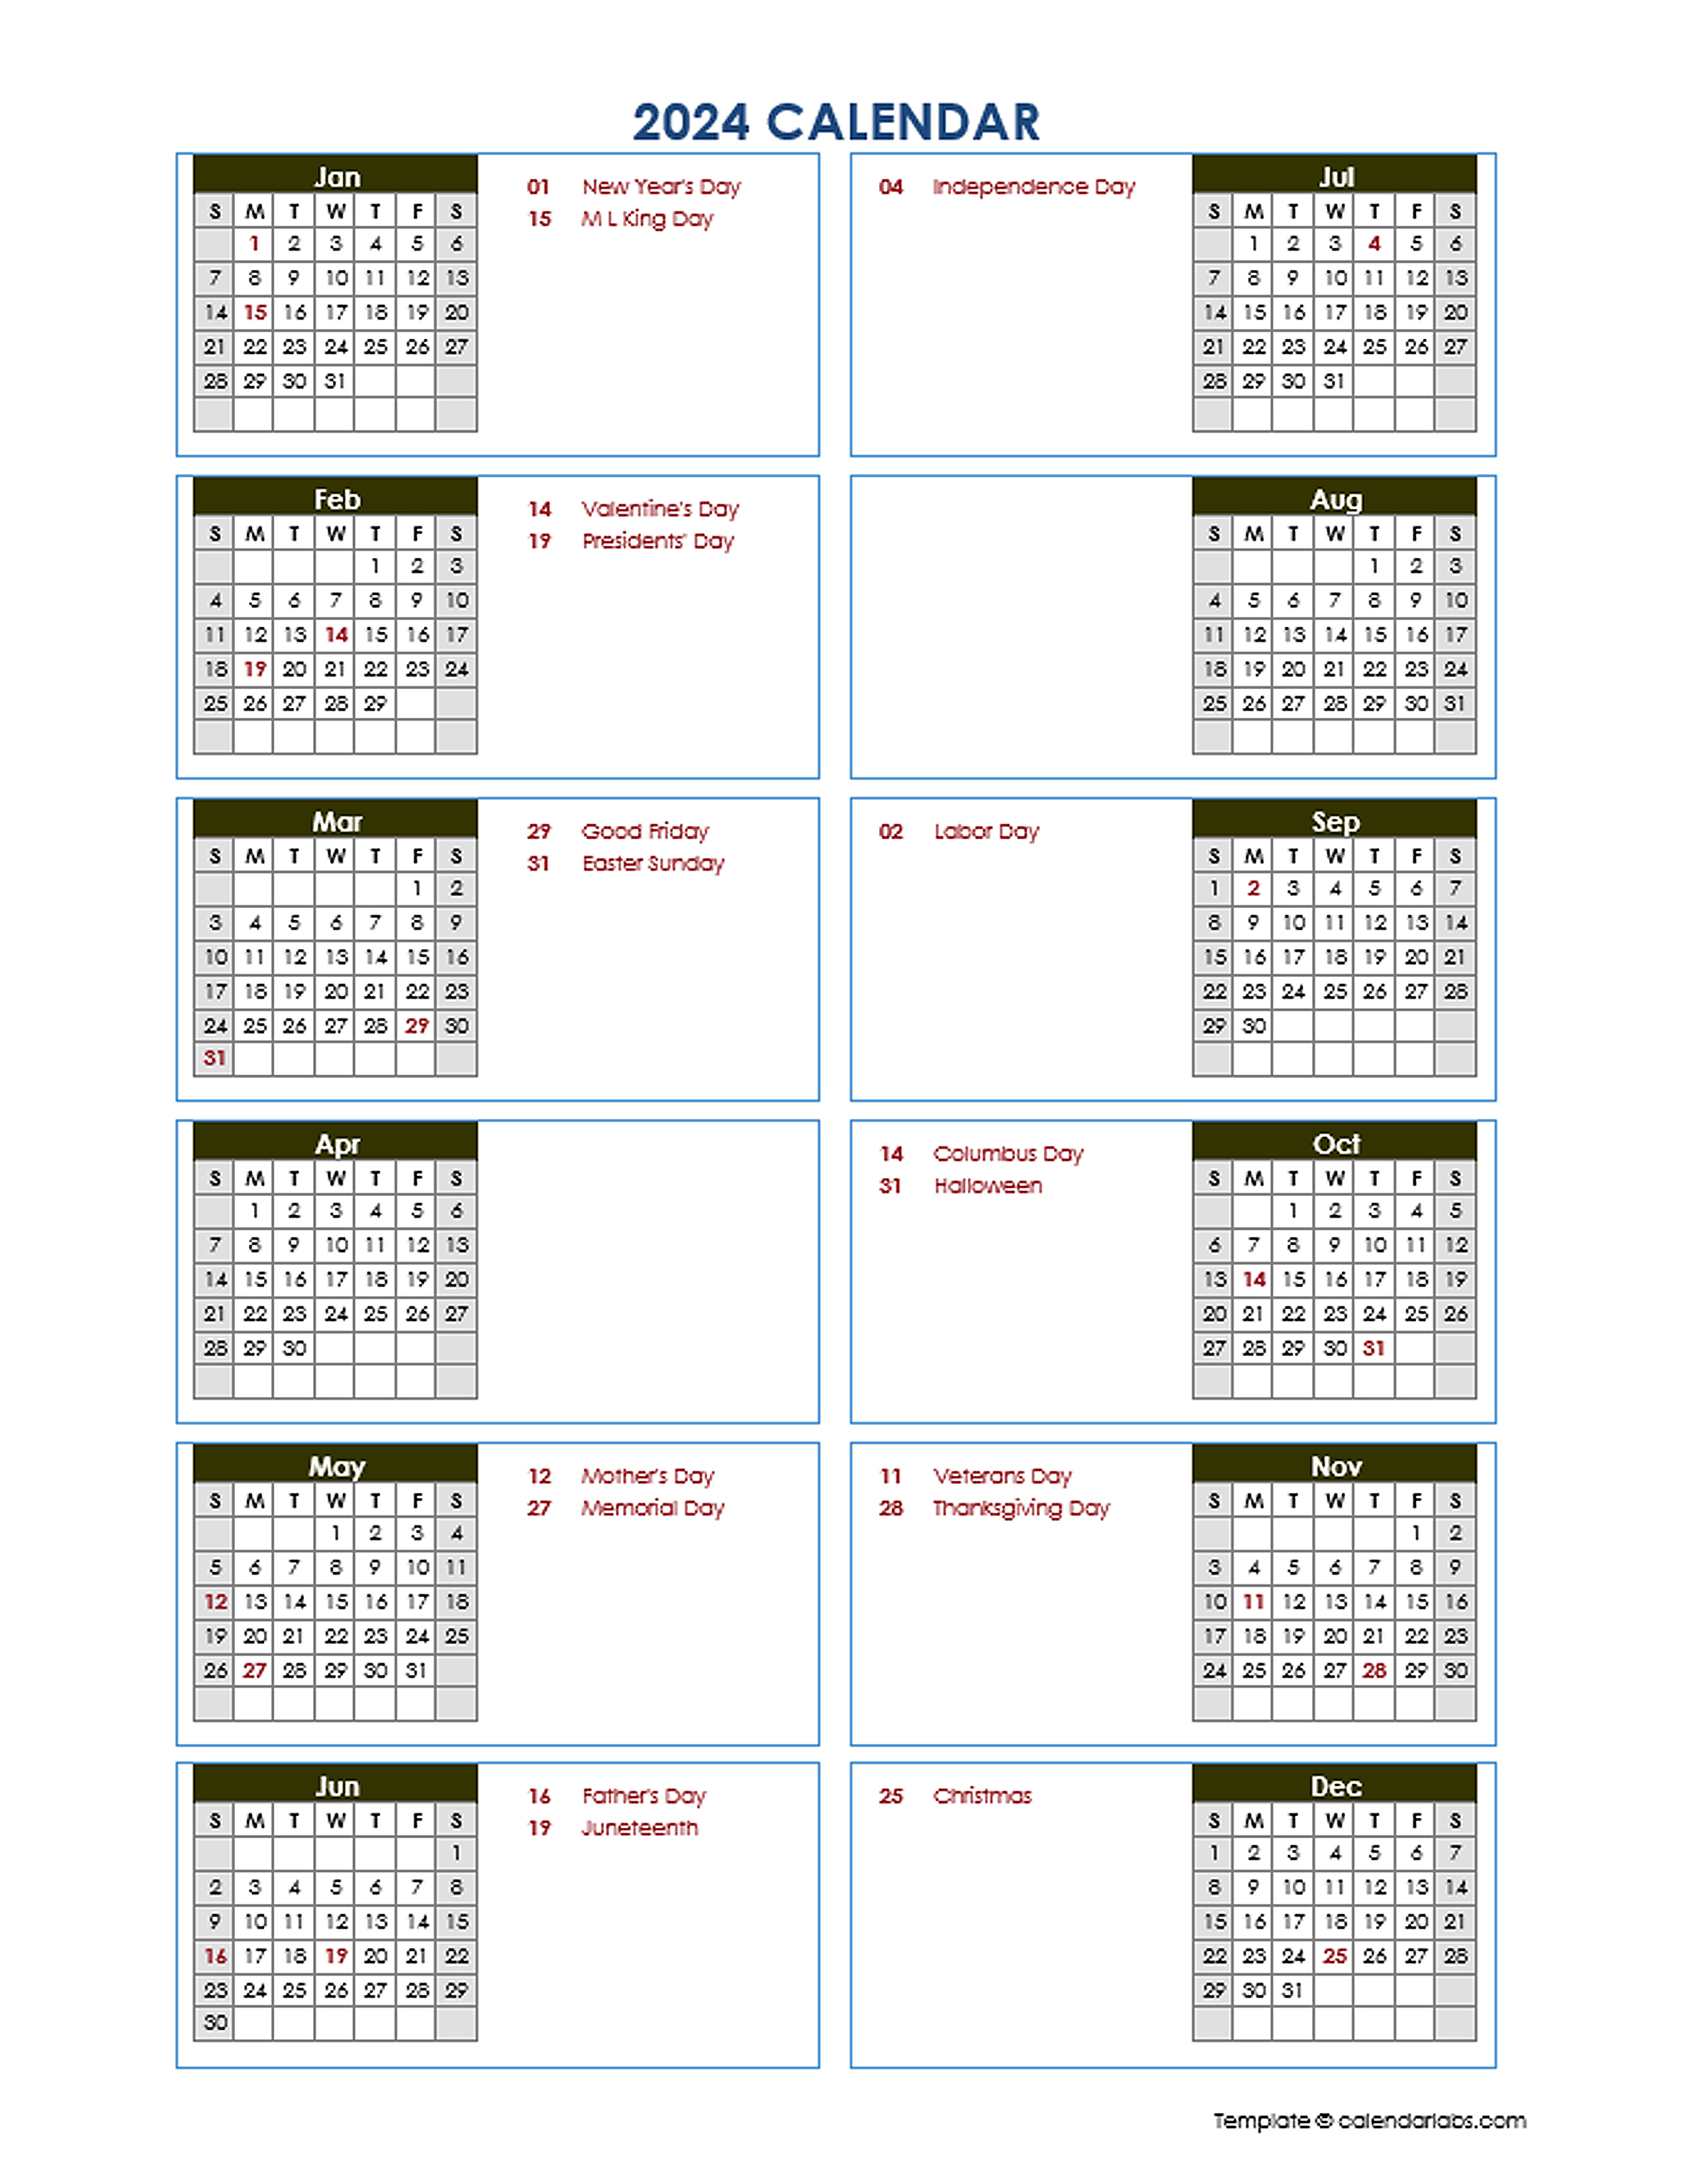 Calendar 2024 Template Free Download Psd Ashly Camille